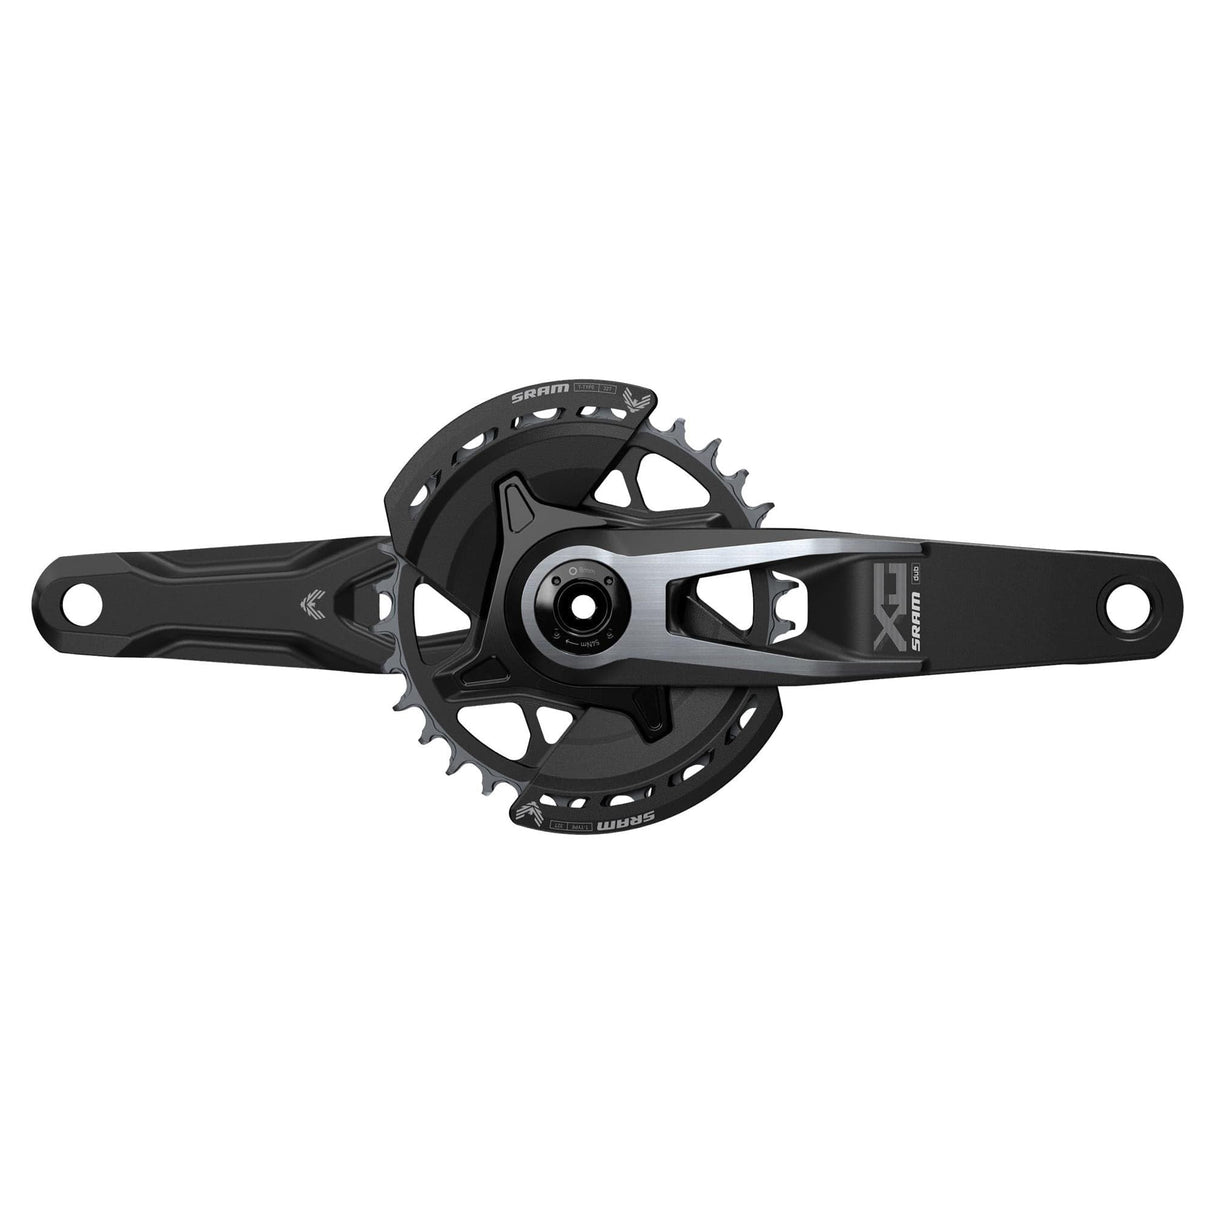 Sram Crankset X0 Eagle Q174 55Mm Chainline Dub Mtb Wide 2-Guards 32T T-Type (Bb & Bb Dub Spacers Are Not Included) V2:  175Mm